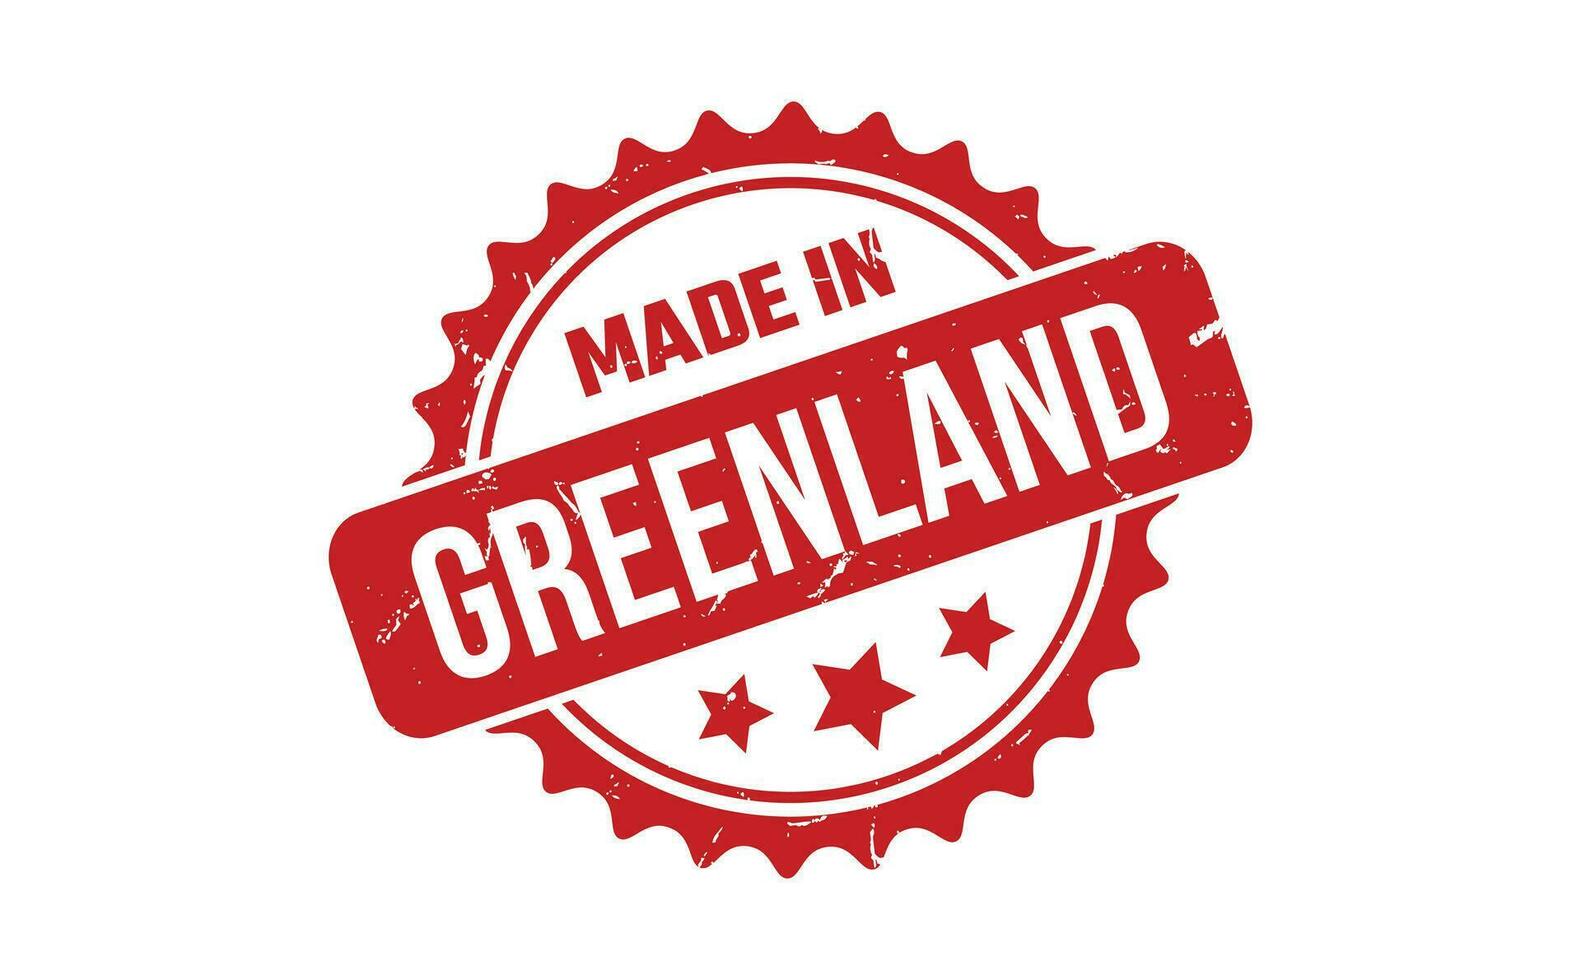 Made In Greenland Rubber Stamp vector